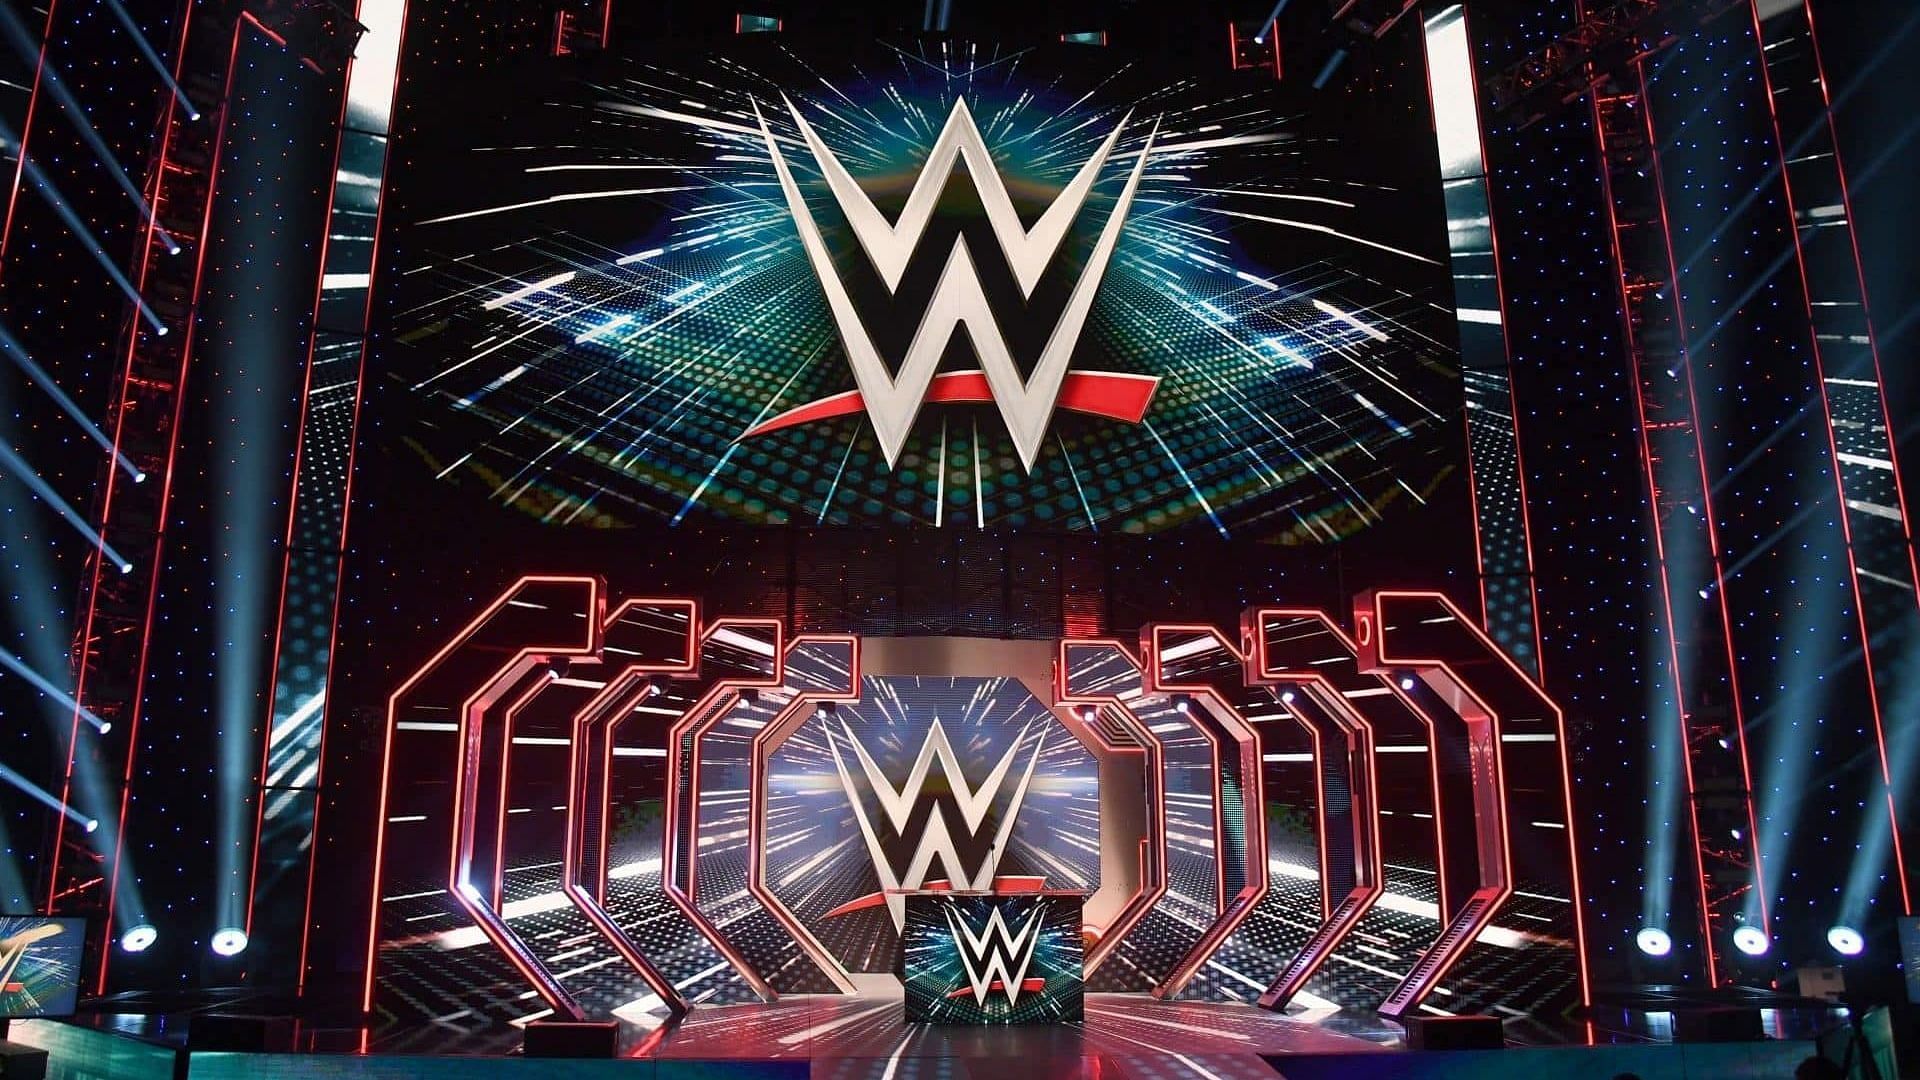 The WWE logos and set/stage on display in arena